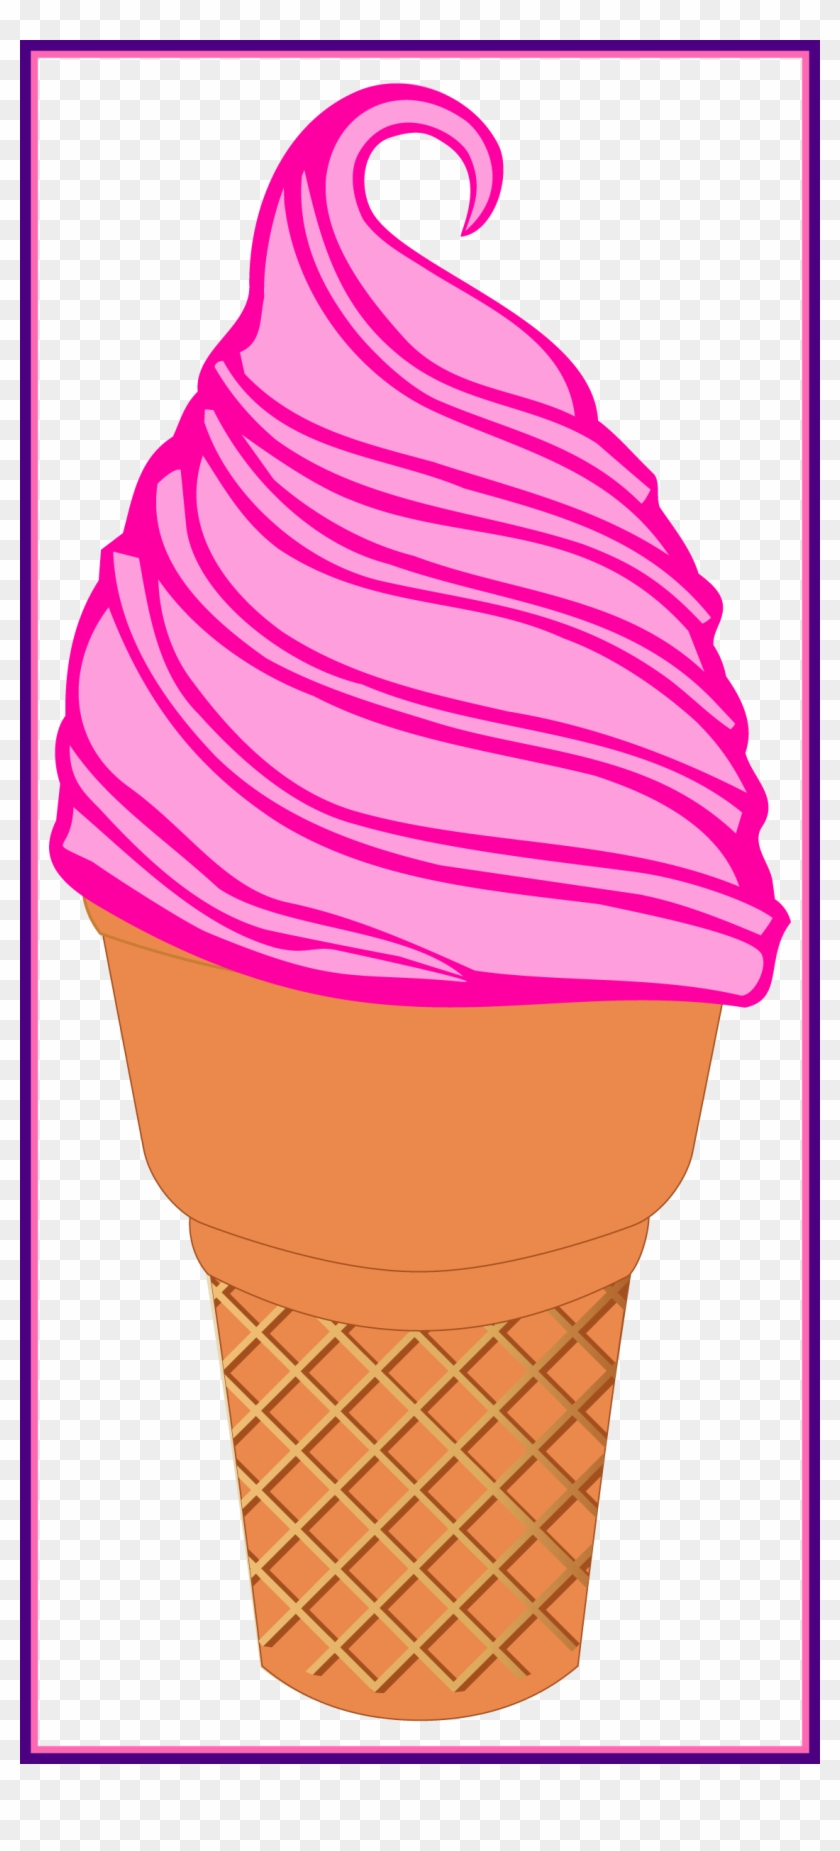 10 Ice Cream Clipart Nº2 - Soft Serve Ice Creams - Png Download #1326325